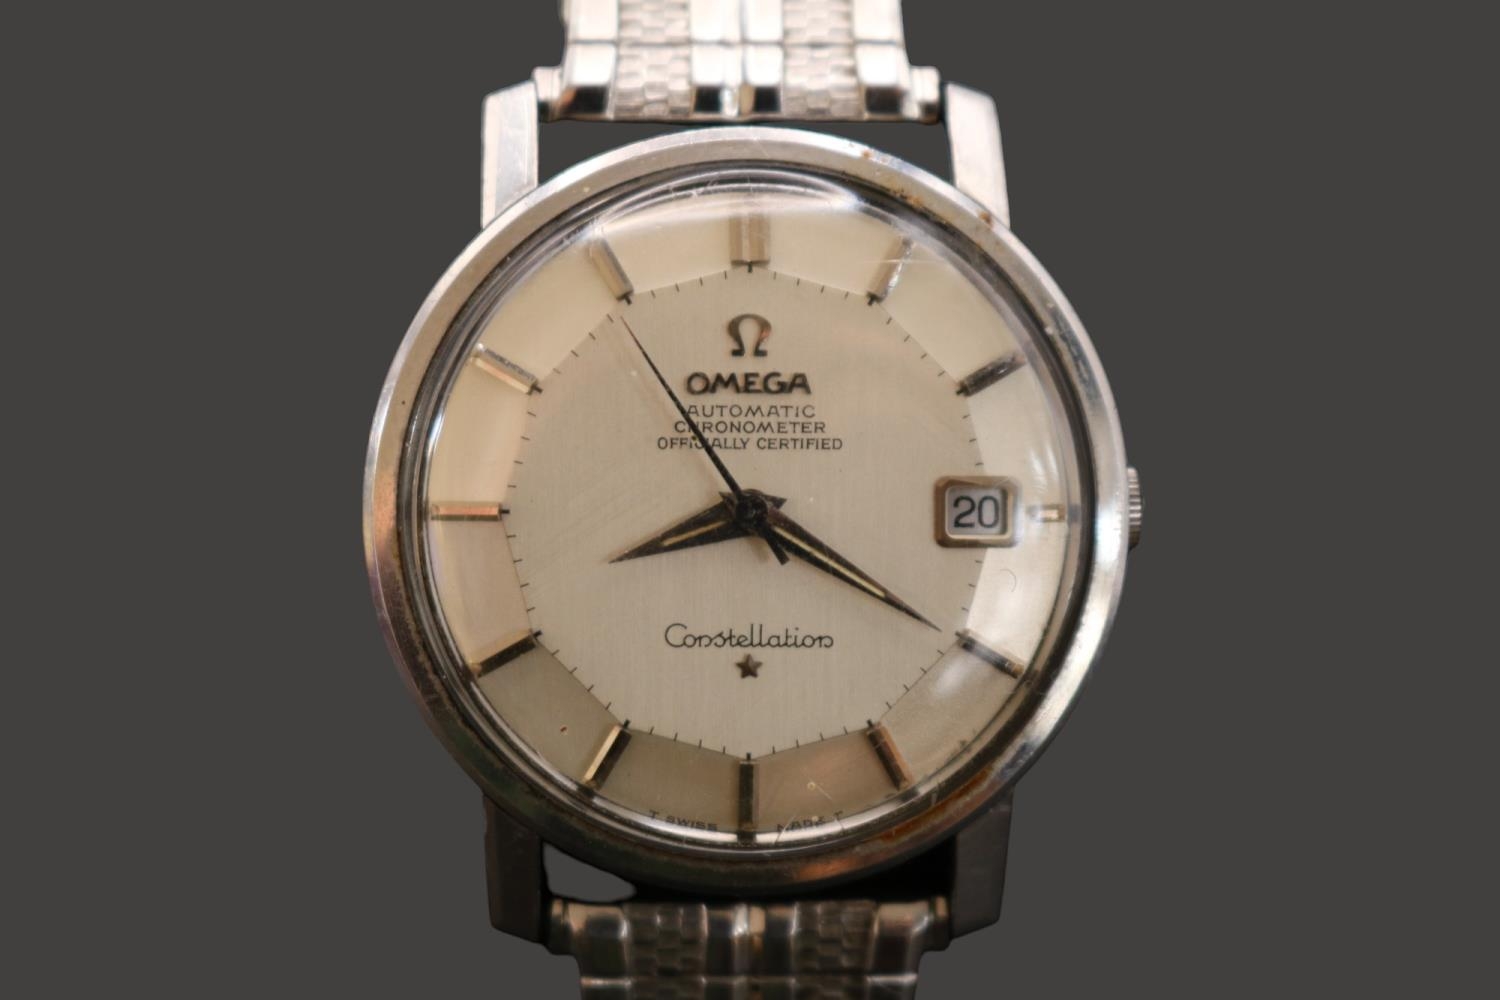 Omega Constellation Automatic Chronometer, pie-pan dial with day window and 21 jewel automatic Swiss